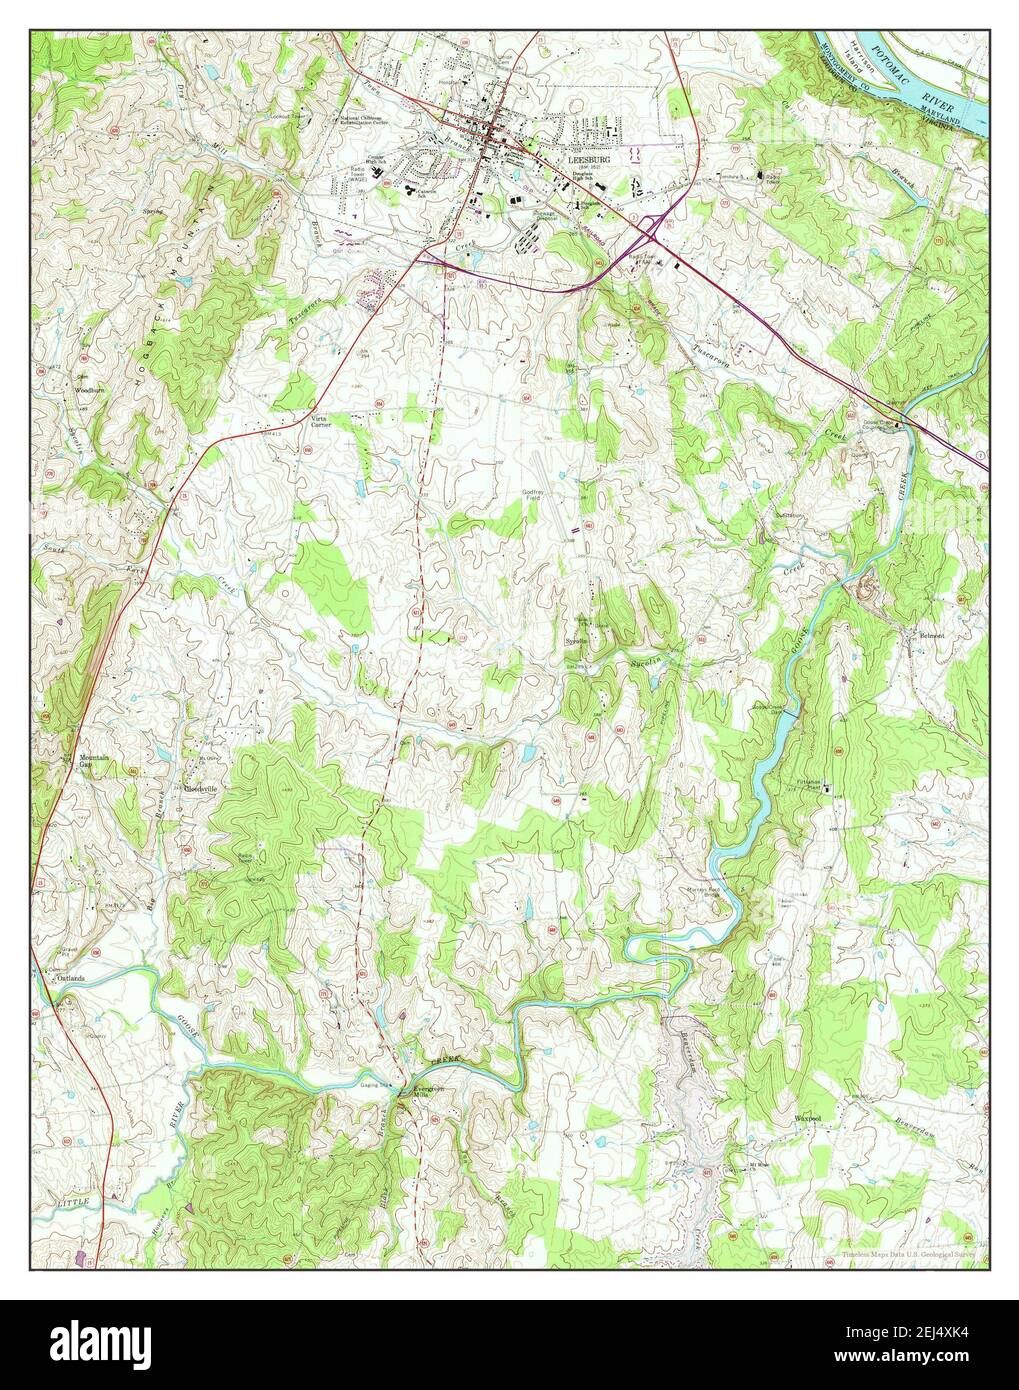 Leesburg, Virginia, map 1968, 1:24000, United States of America by Timeless Maps, data U.S. Geological Survey Stock Photo